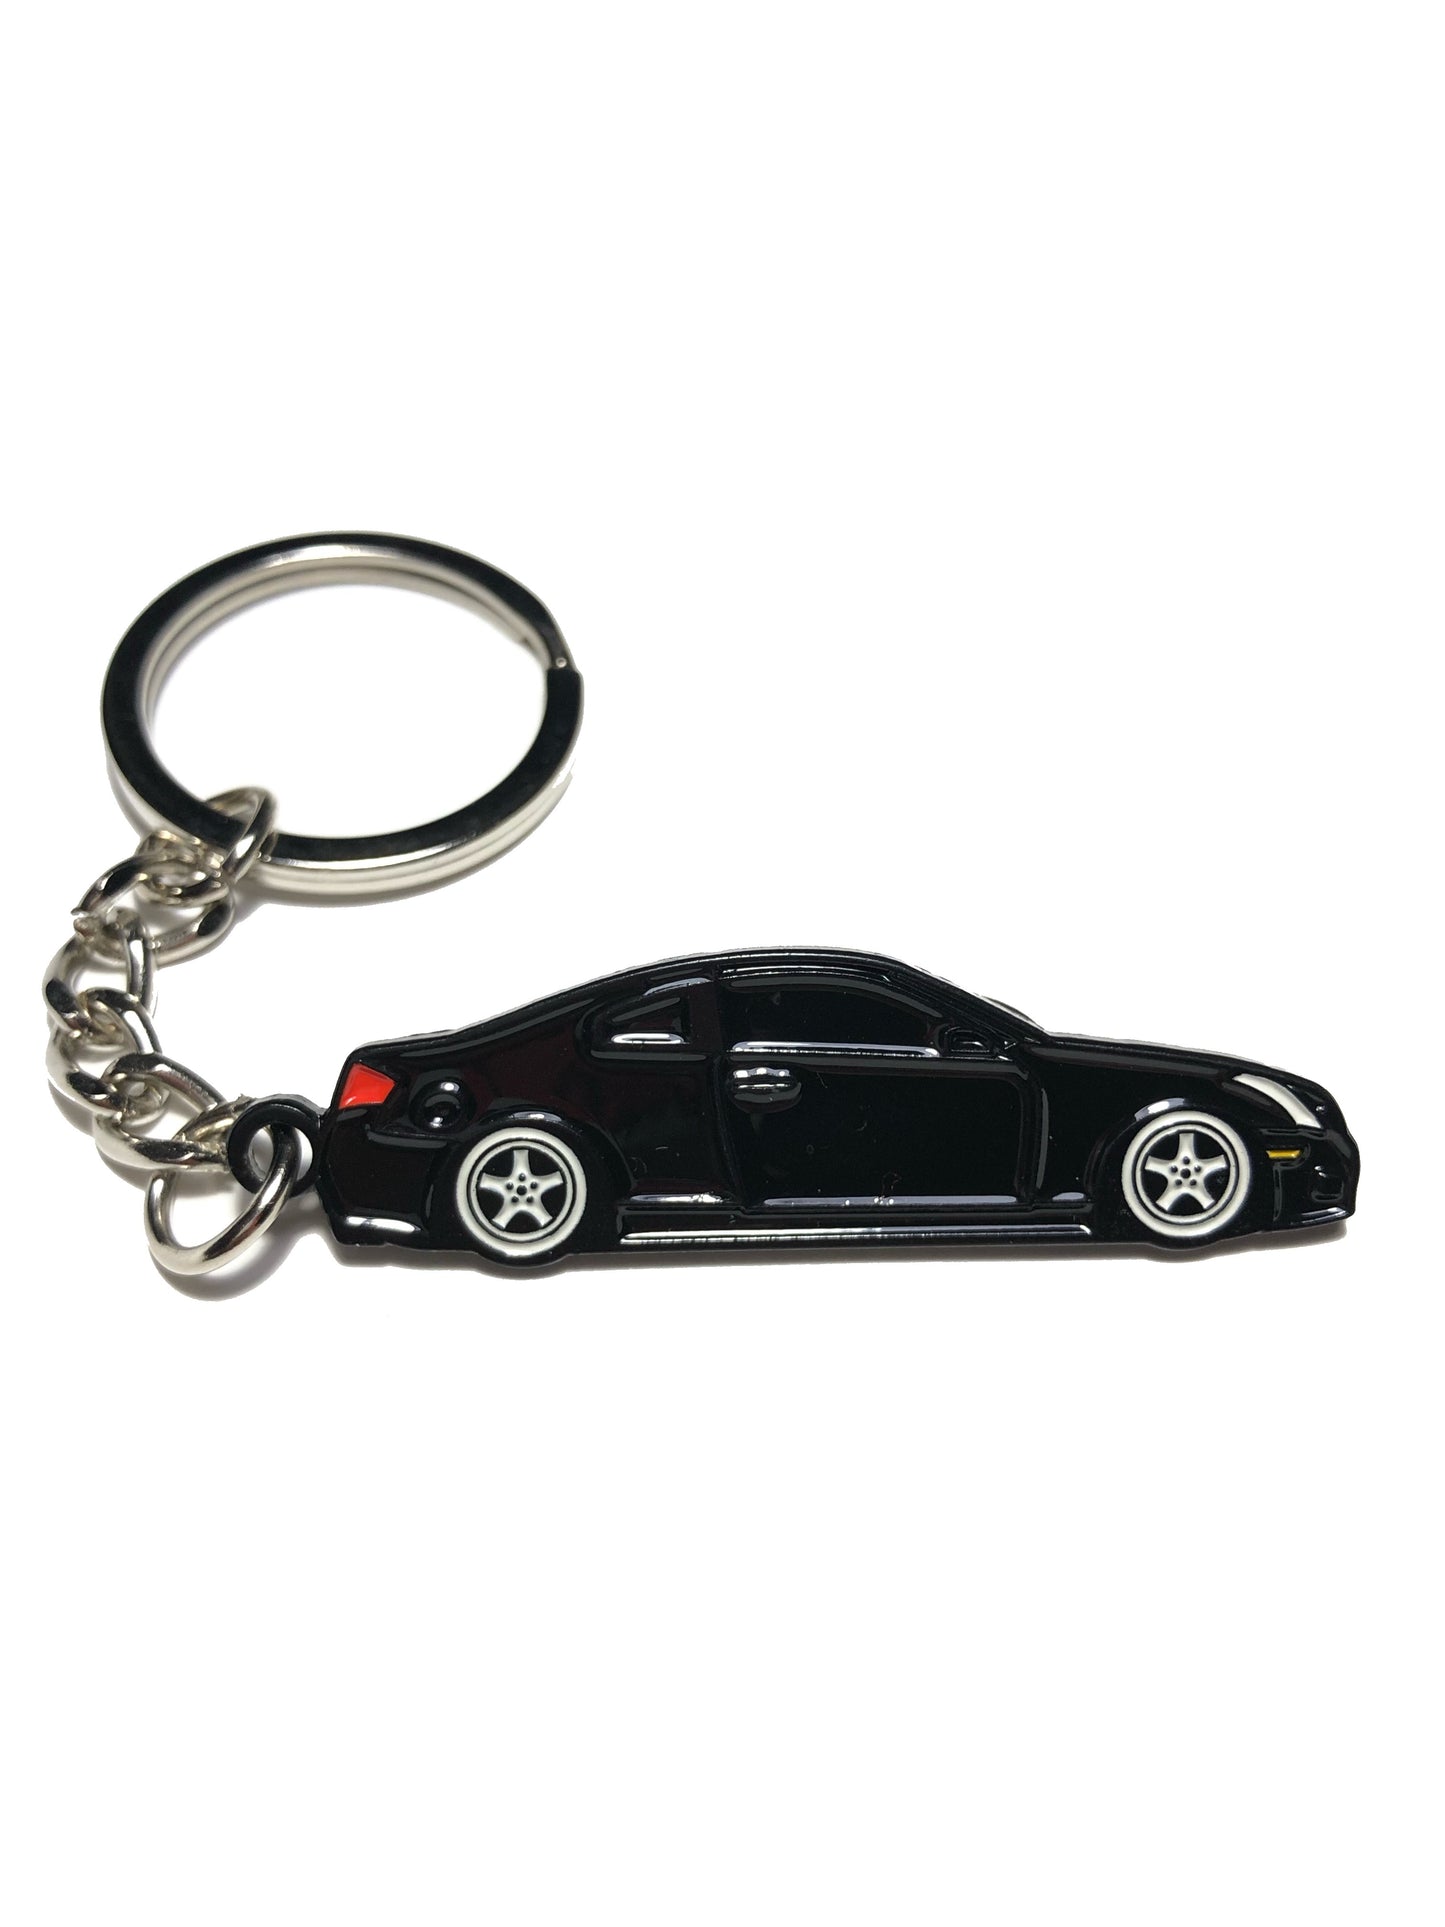 G35 Coupe Keychains